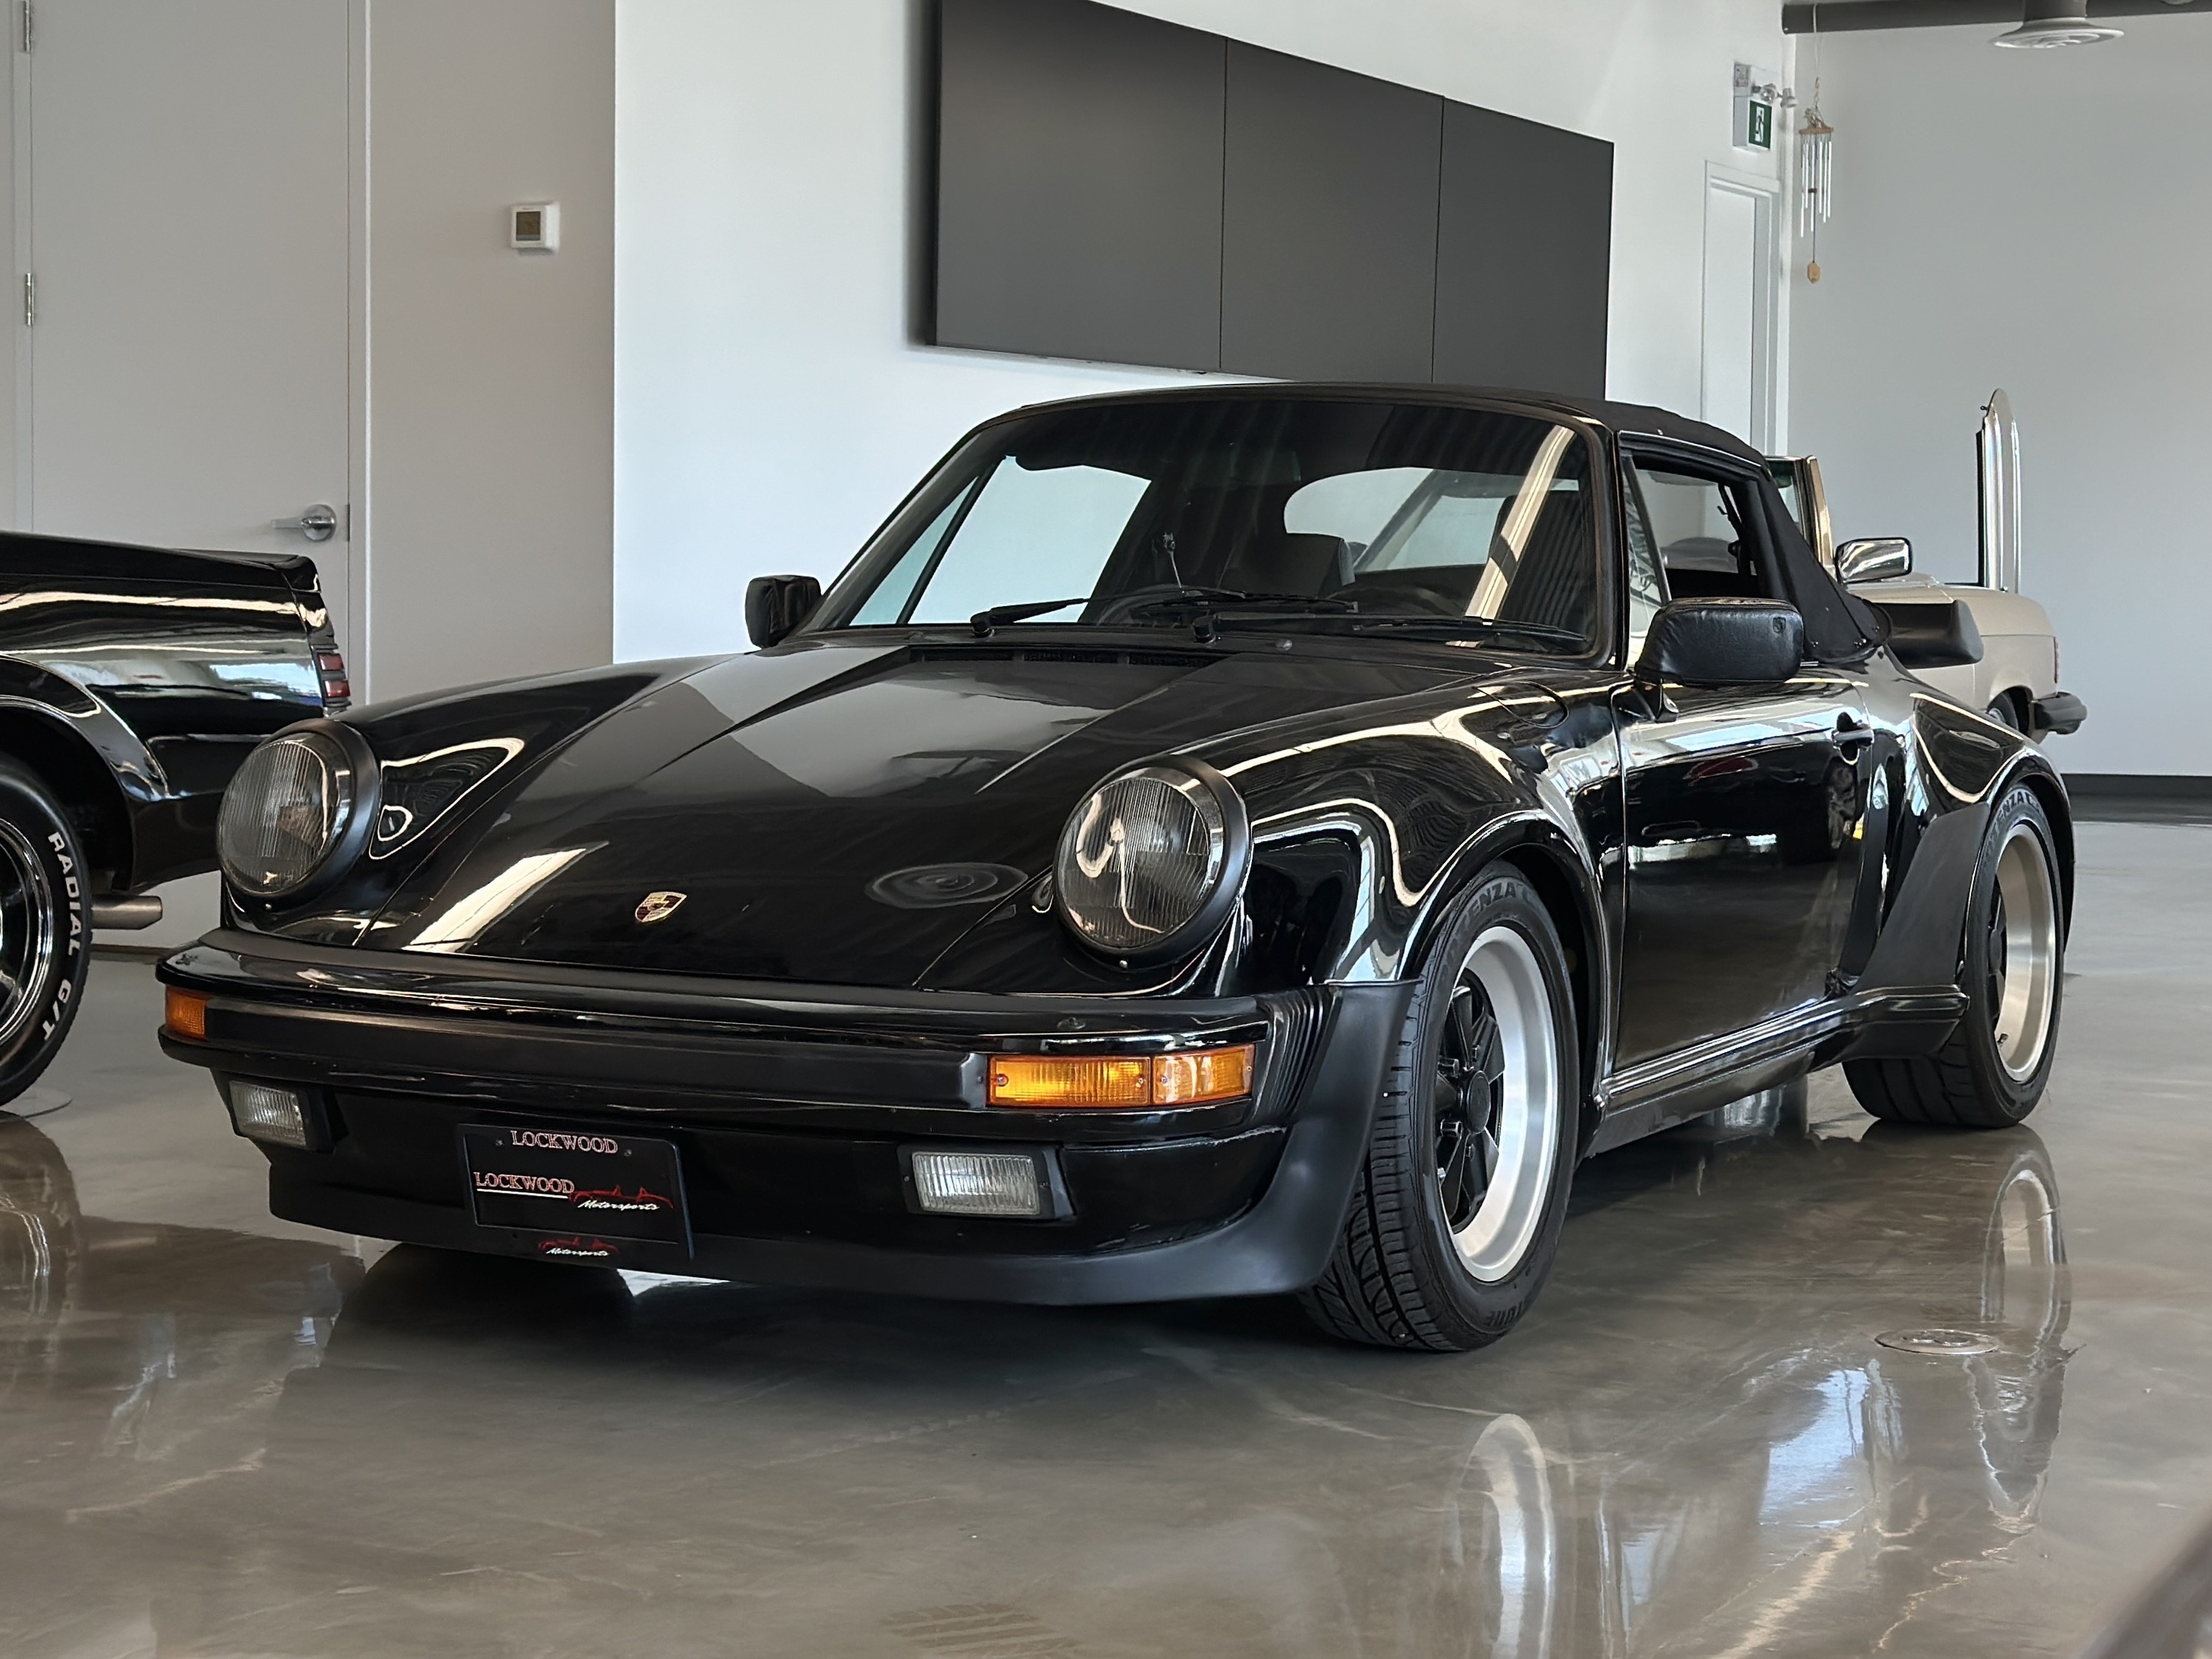 1989 Porsche 911 TURBO CABRIOLET | 5-SPEED MANUAL | FULLY SERVICED 